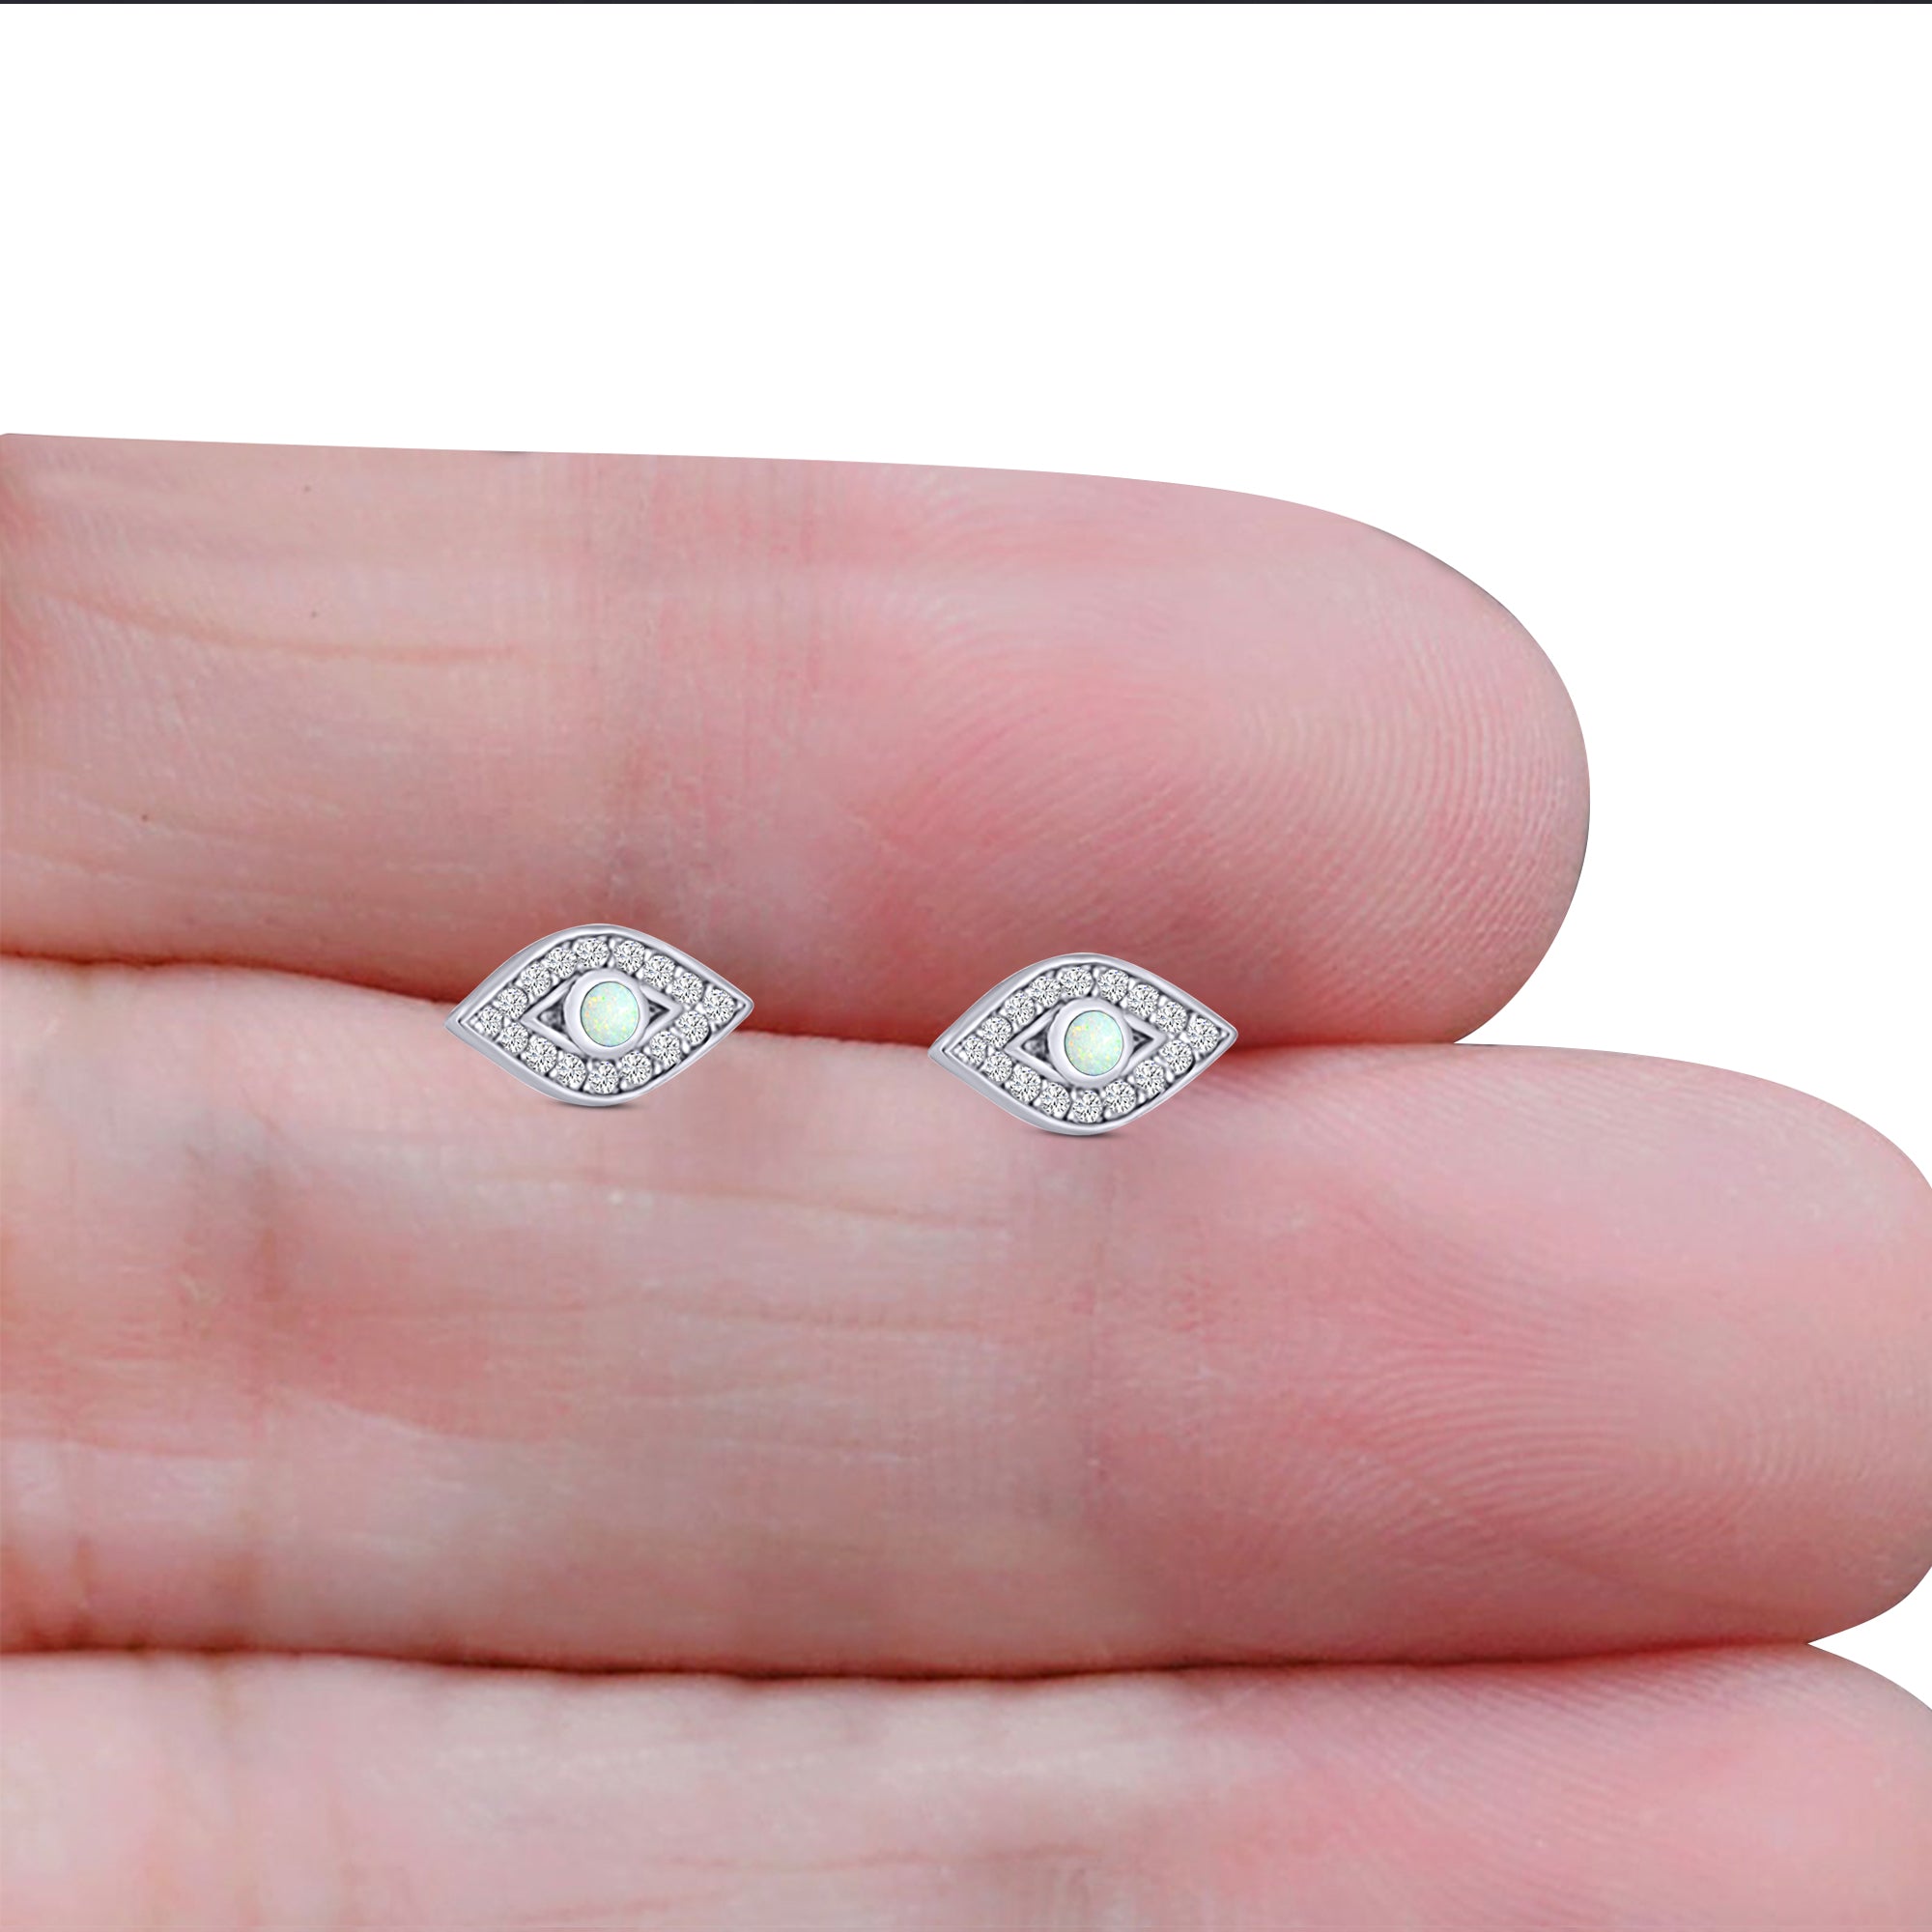 Halo Eye Stud Earring Simulated Cubic Zirconia Created White Opal Solid 925 Sterling Silver (5.8mm)